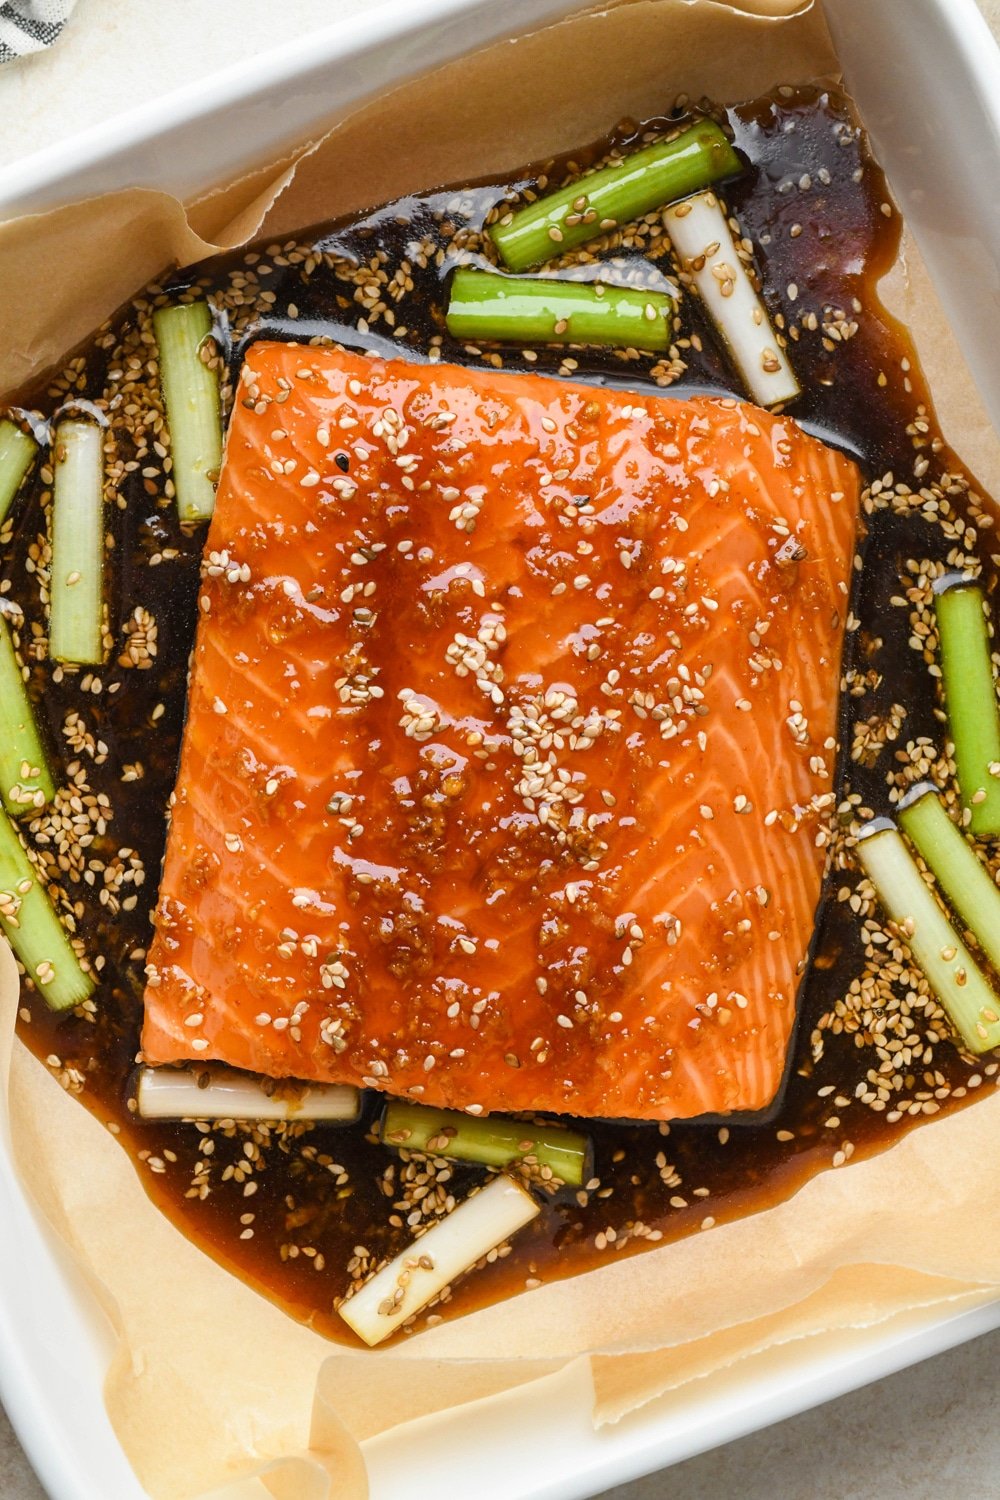 How to make garlic ginger salmon: Sauce poured over the salmon filet in baking dish.